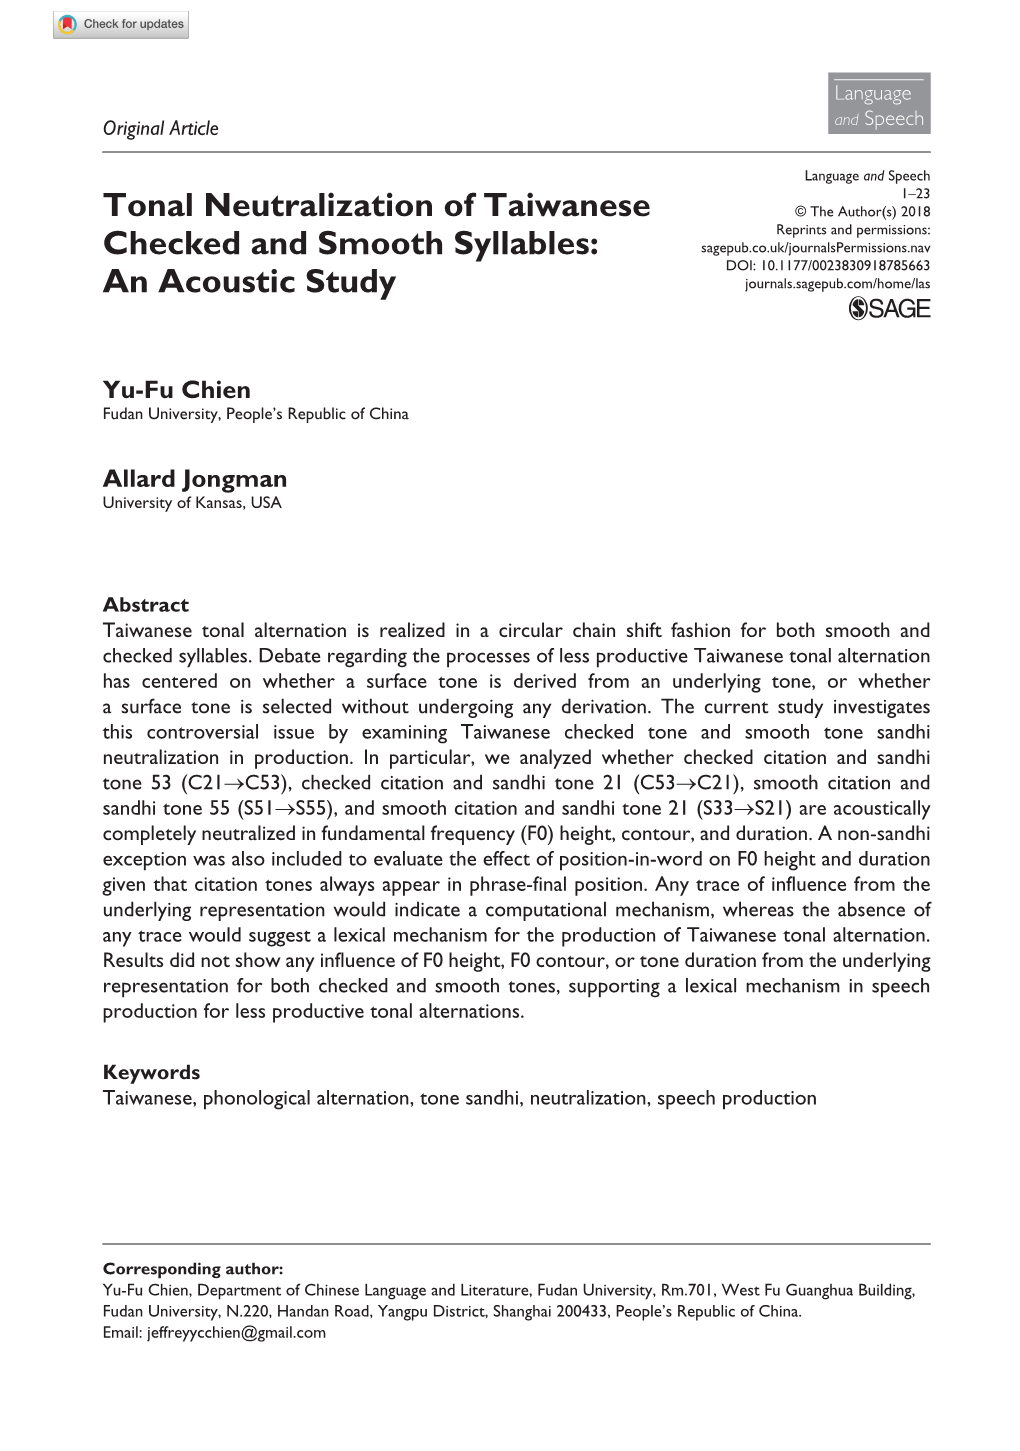 Tonal Neutralization of Taiwanese Checked and Smooth Syllables: An